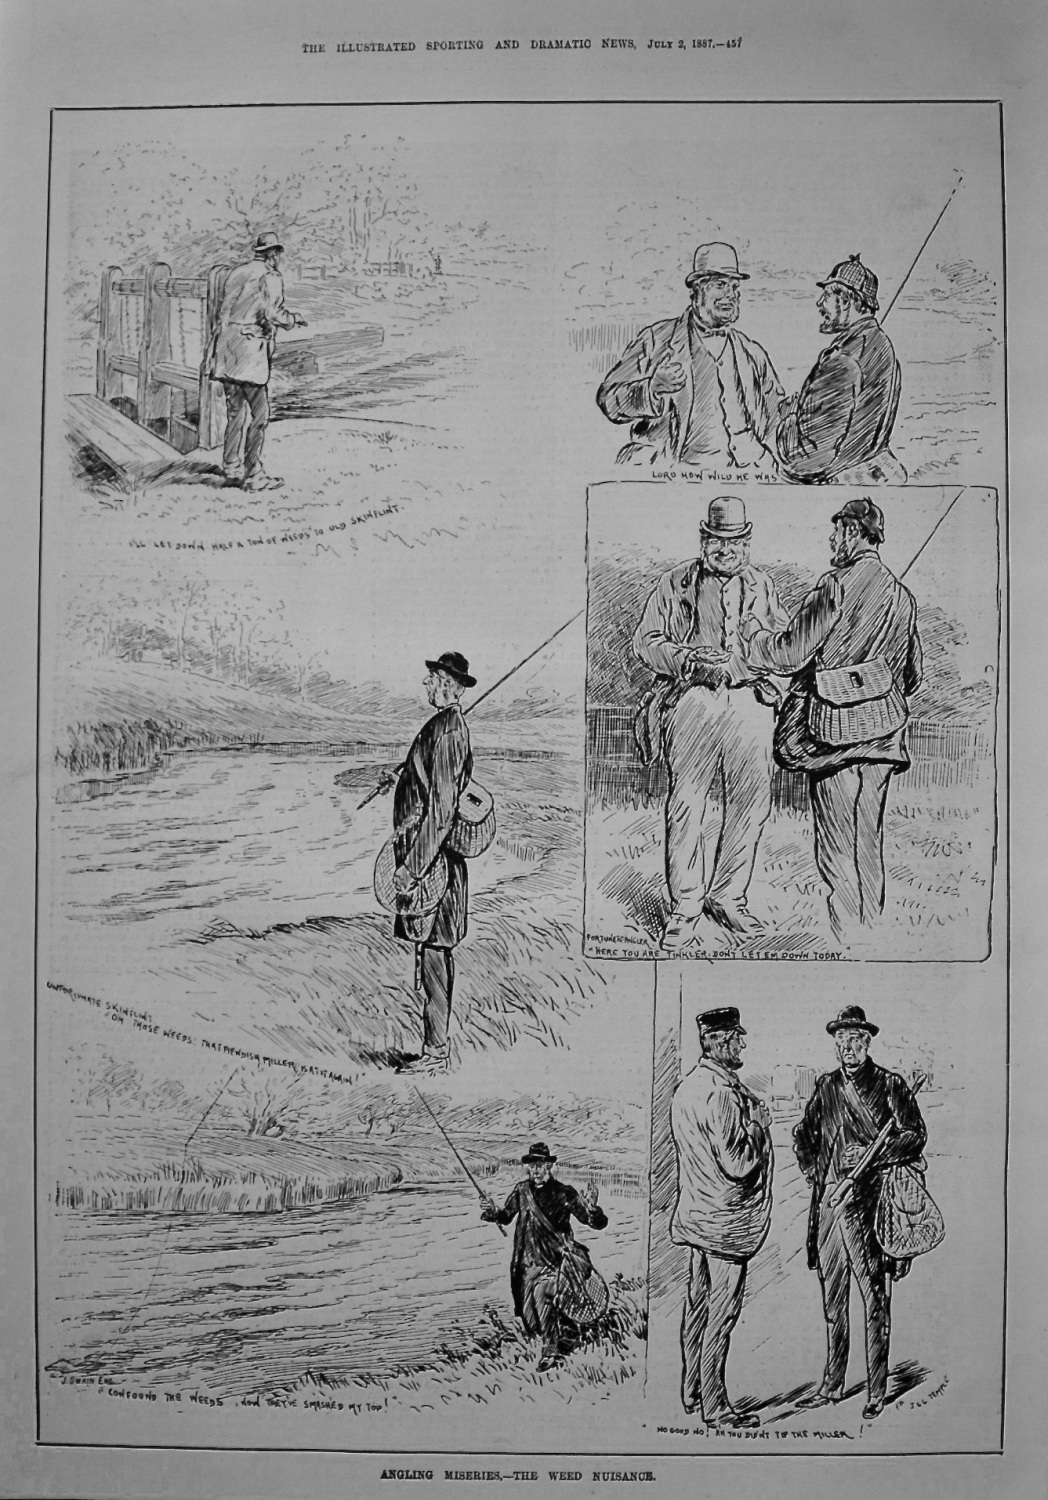 Angling Miseries.- The Weed Nuisance. 1887